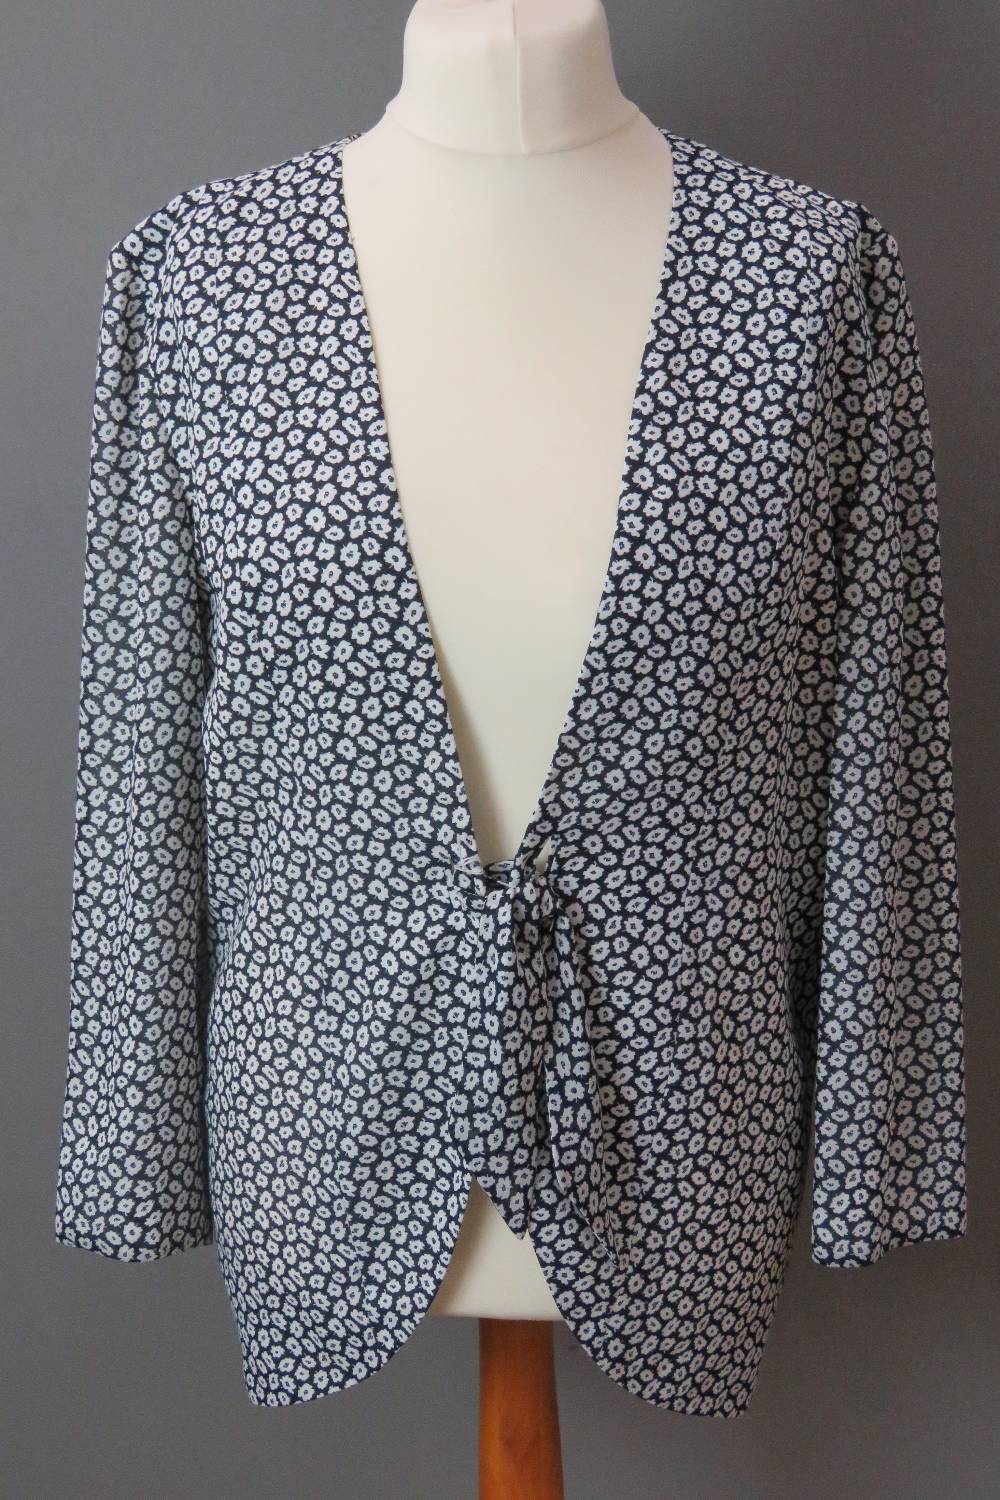 Frank Usher; a light floral jacket having tie waist in navy and white, UK size 12.